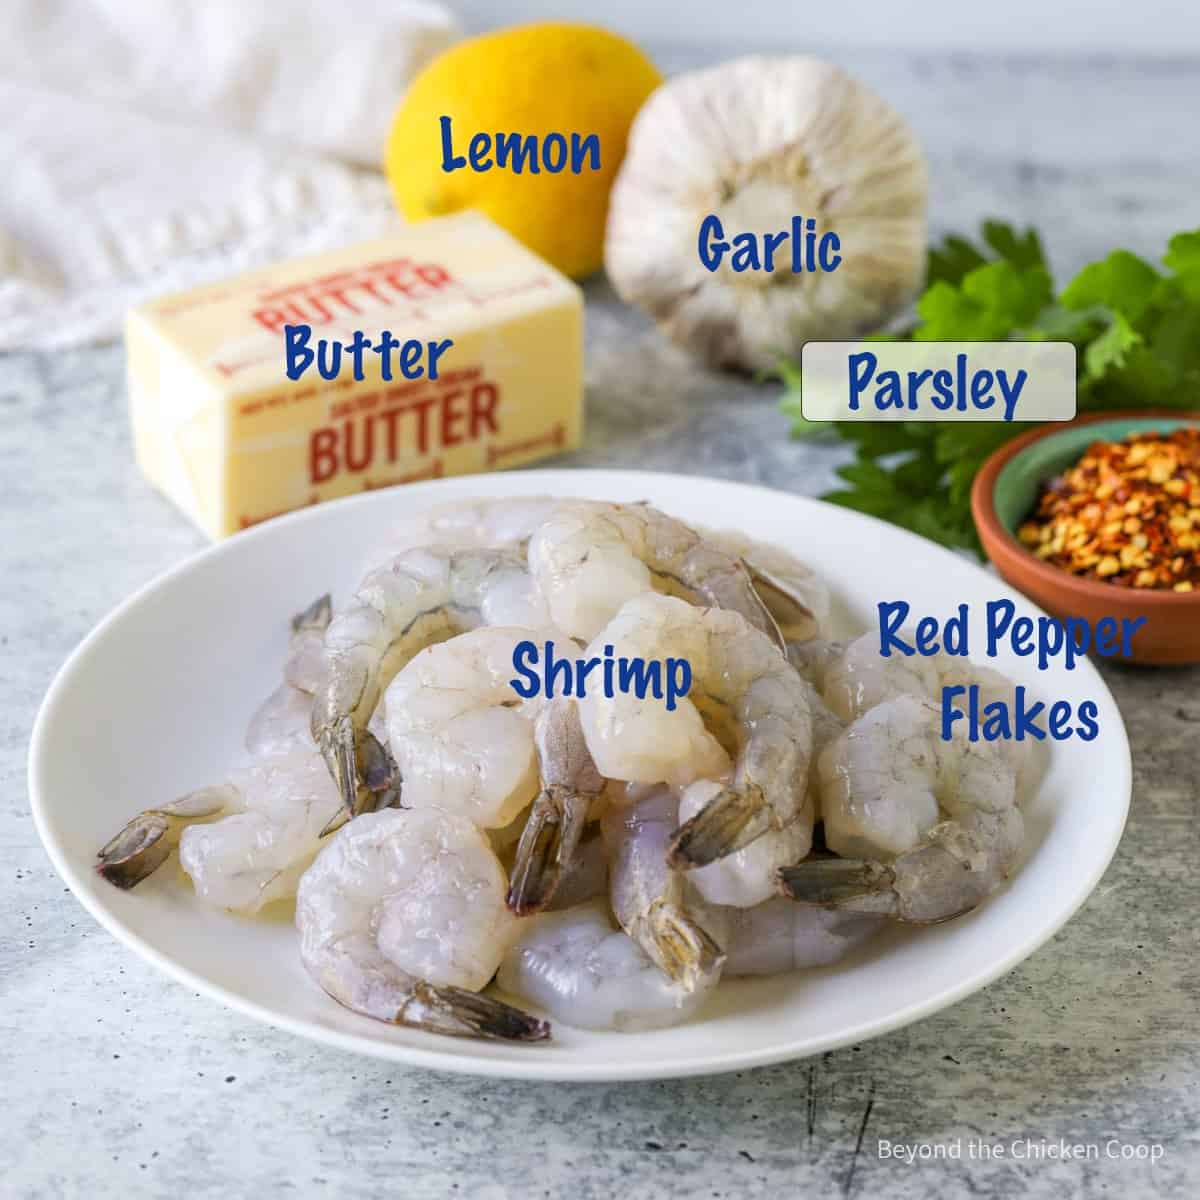 Raw shrimp in a bowl next to other ingredients.